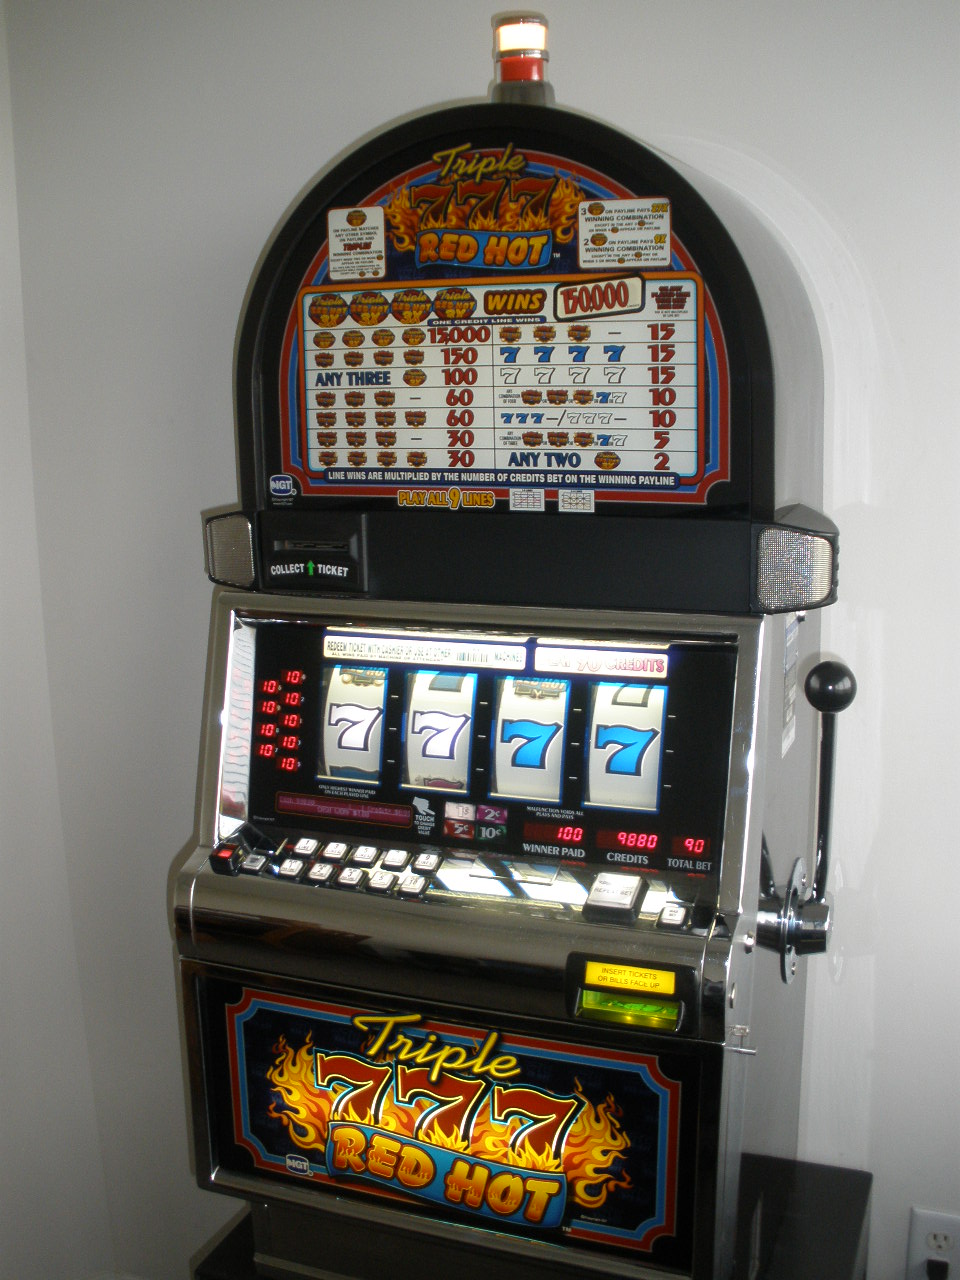 IGT TRIPLE RED HOT 777s FOUR REEL S2000 SLOT MACHINE For Sale • Gambler ...